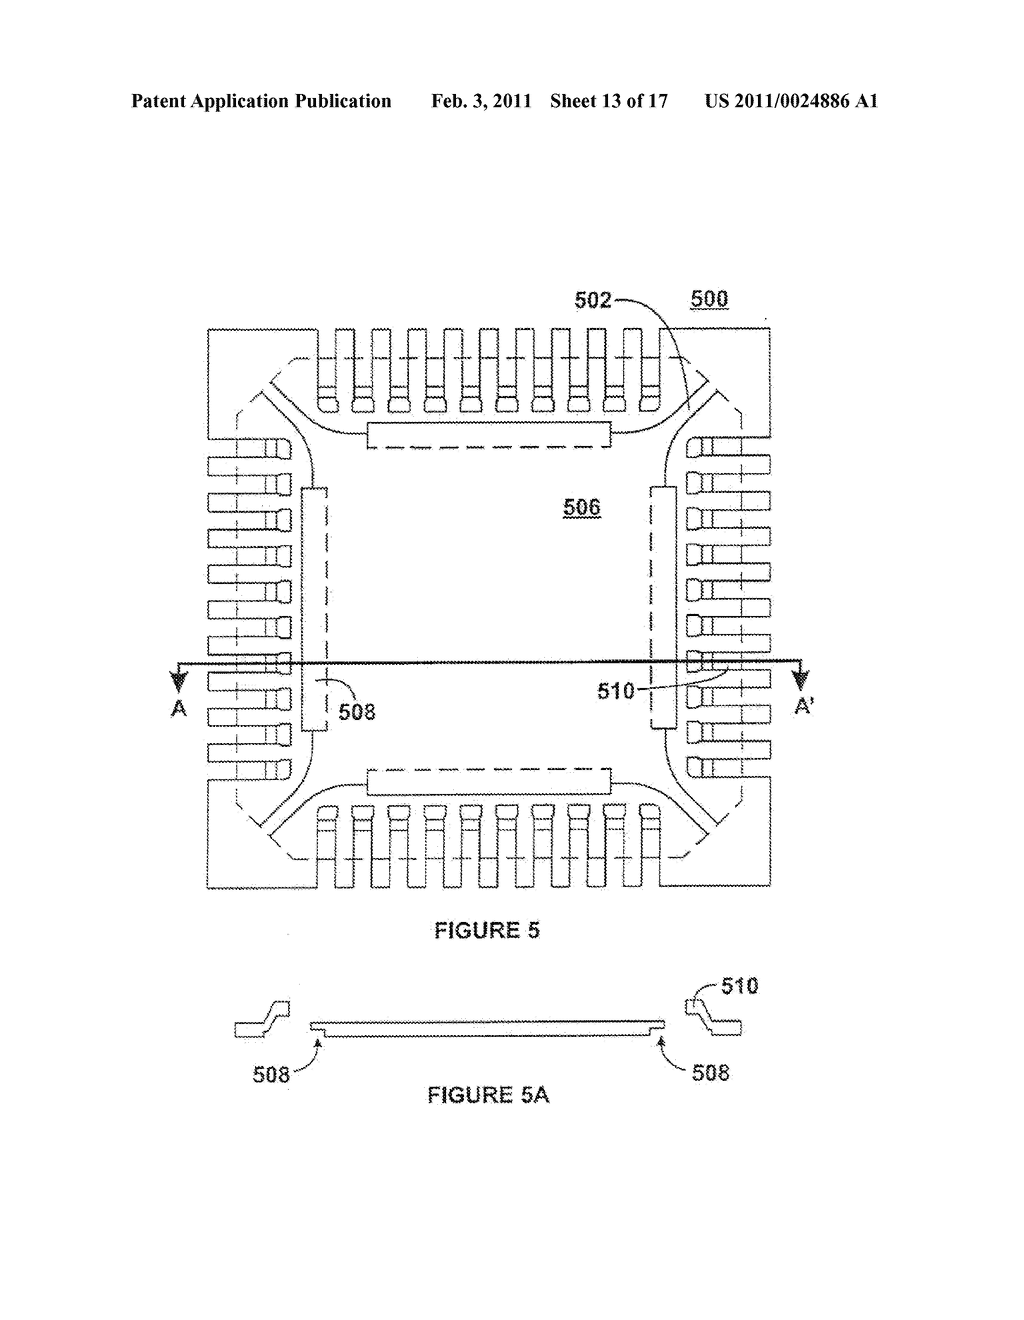 SEMICONDUCTOR DEVICE PACKAGE HAVING FEATURES FORMED BY STAMPING - diagram, schematic, and image 14